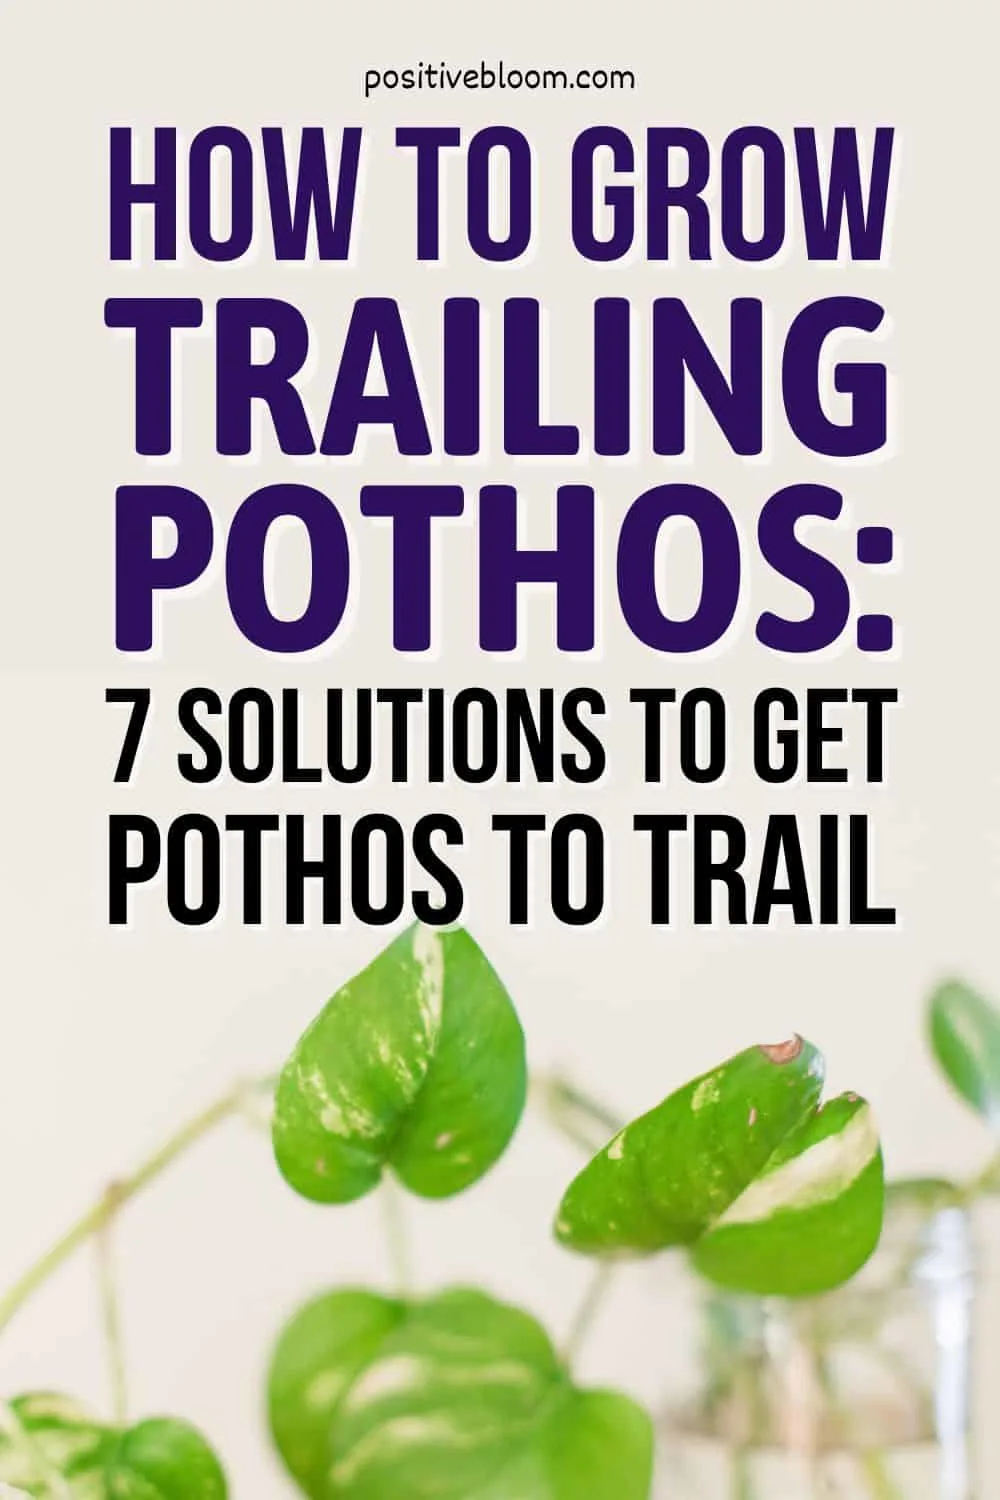 How To Grow Trailing Pothos 7 Solutions To Get Pothos To Trail Pinterest